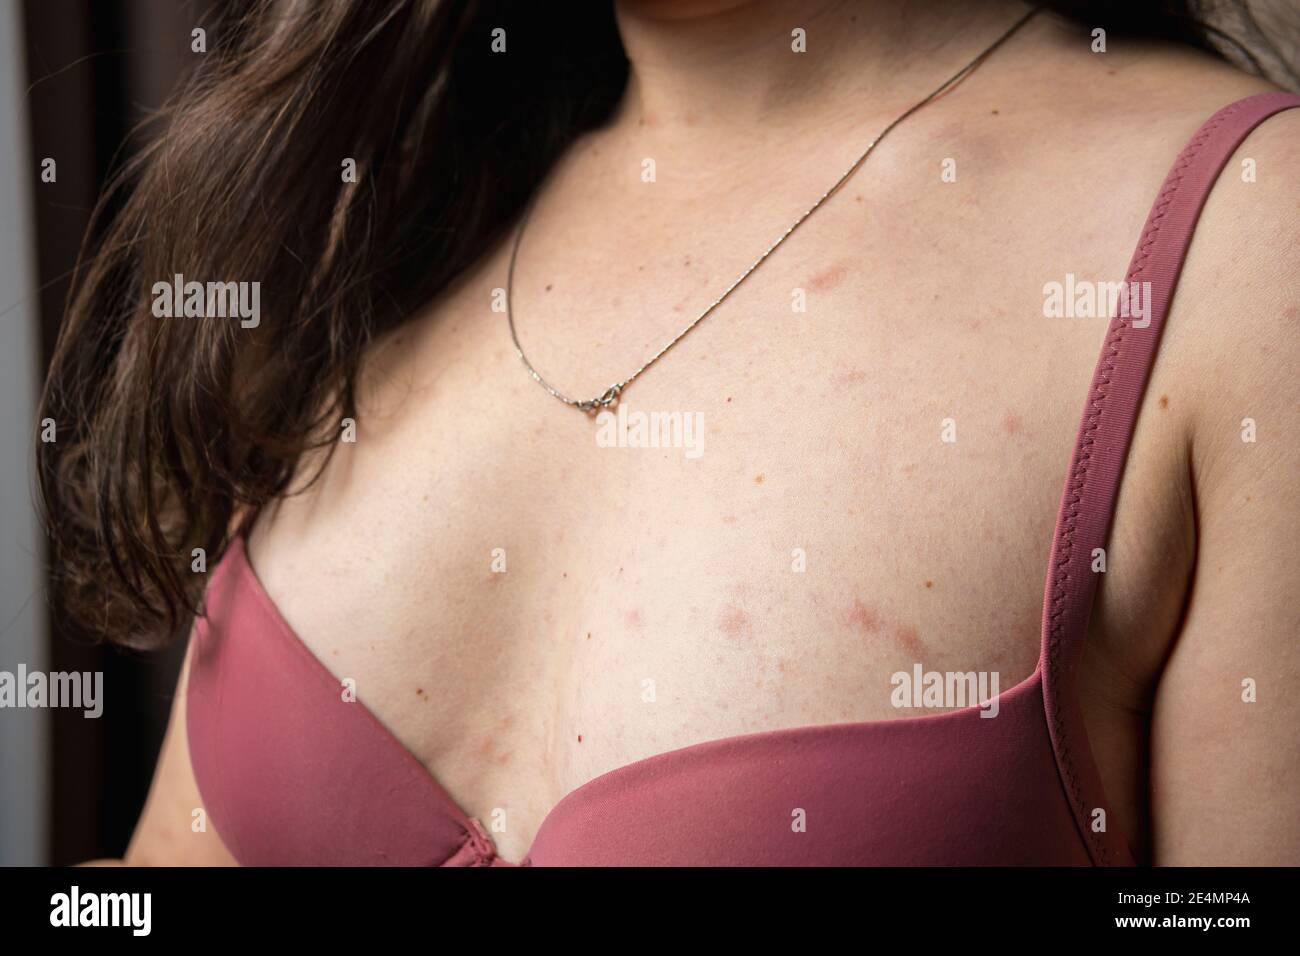 Women with symptoms of itchy urticaria or allergic reaction on the skin.  Red rash on the females body. Concepts of allergy, skin diseases and health  c Stock Photo - Alamy